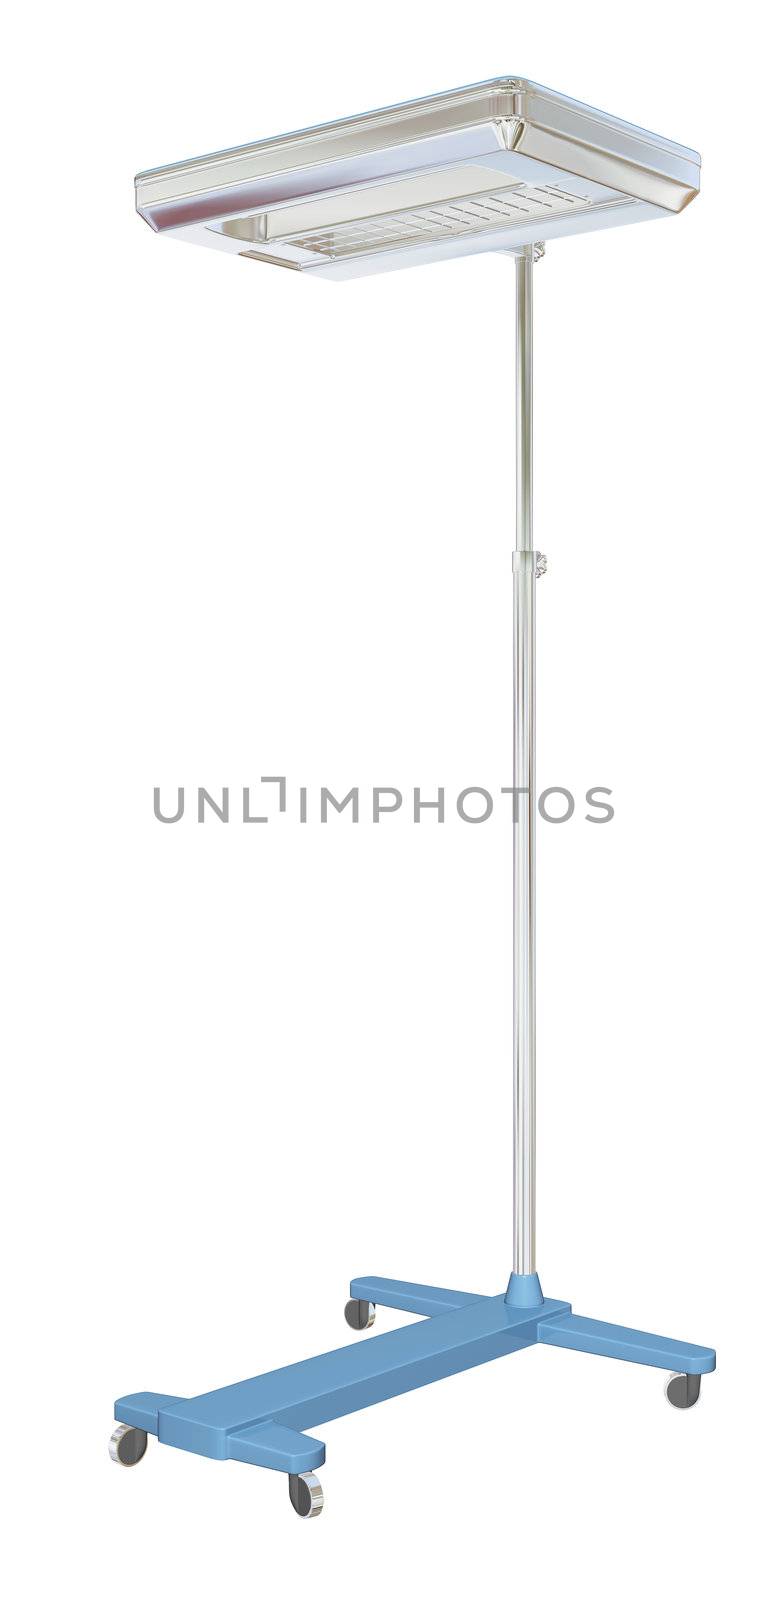 Mobile medical examination lamp, white blue, metal, 3D illustration, isolated against a white background.